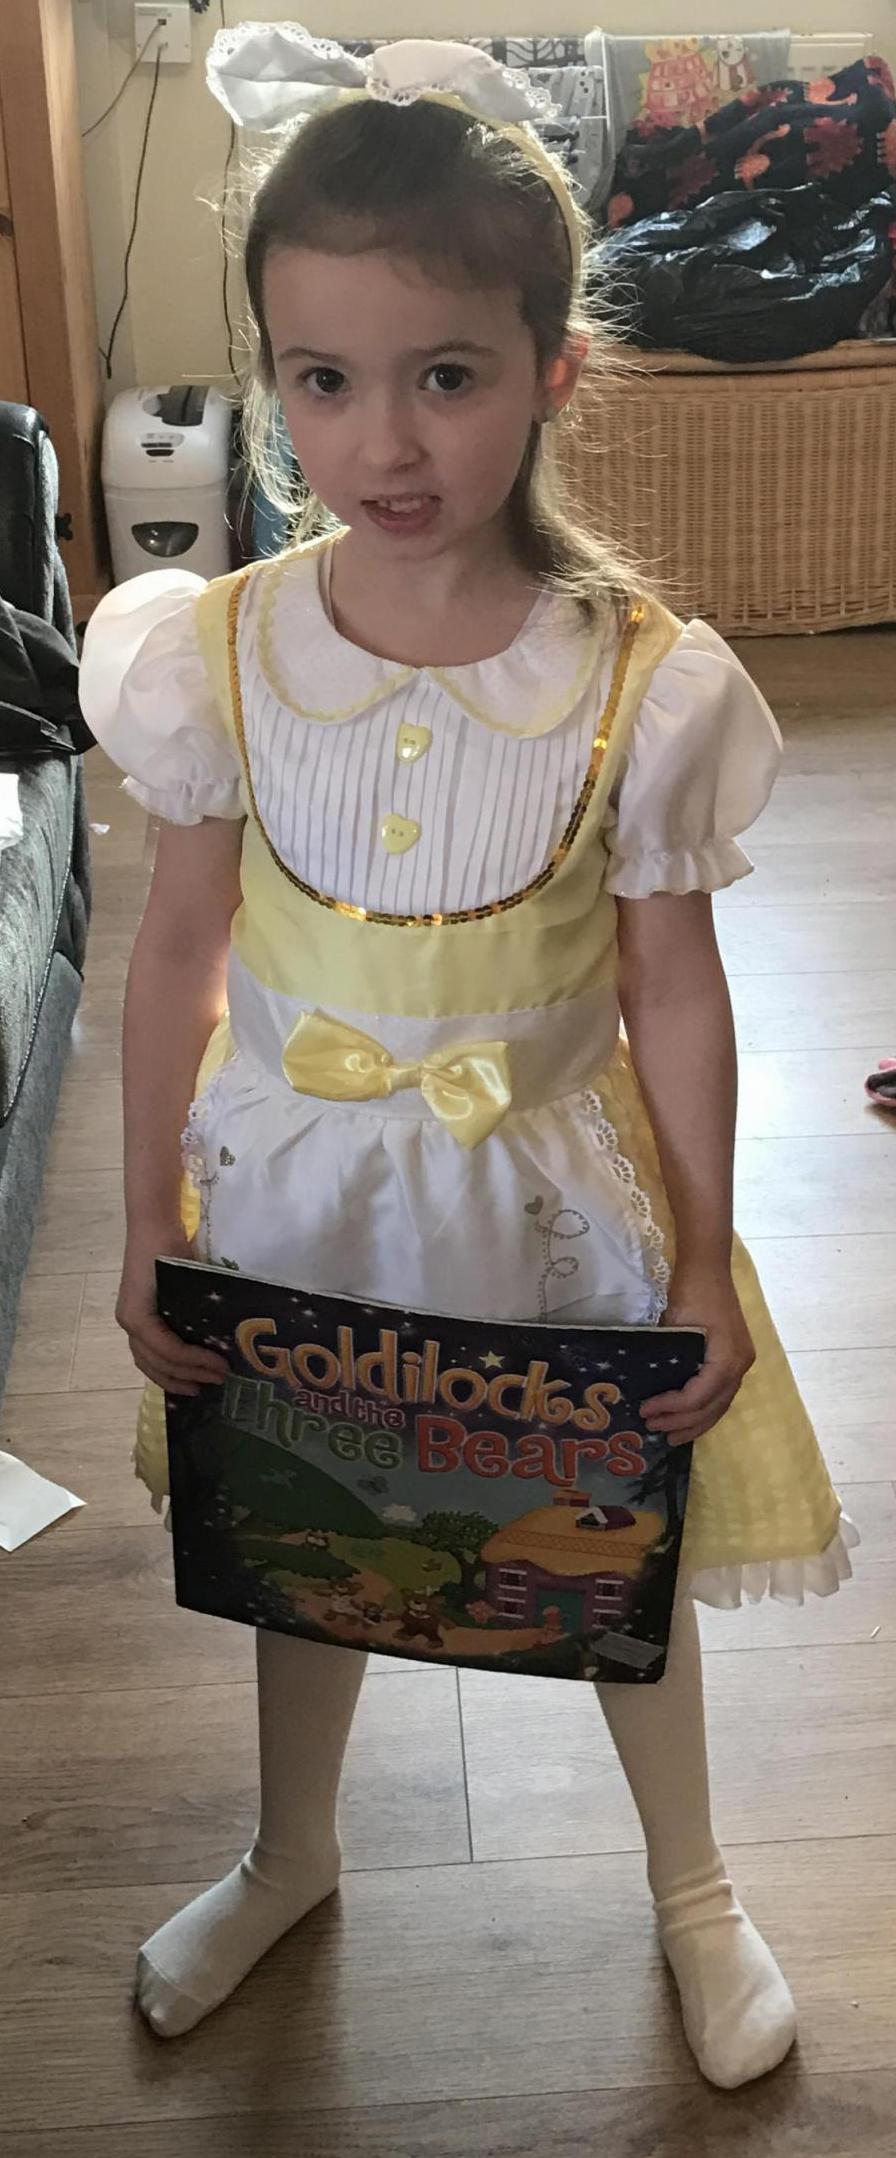 Andrea Baker sent us this World Book Day picture